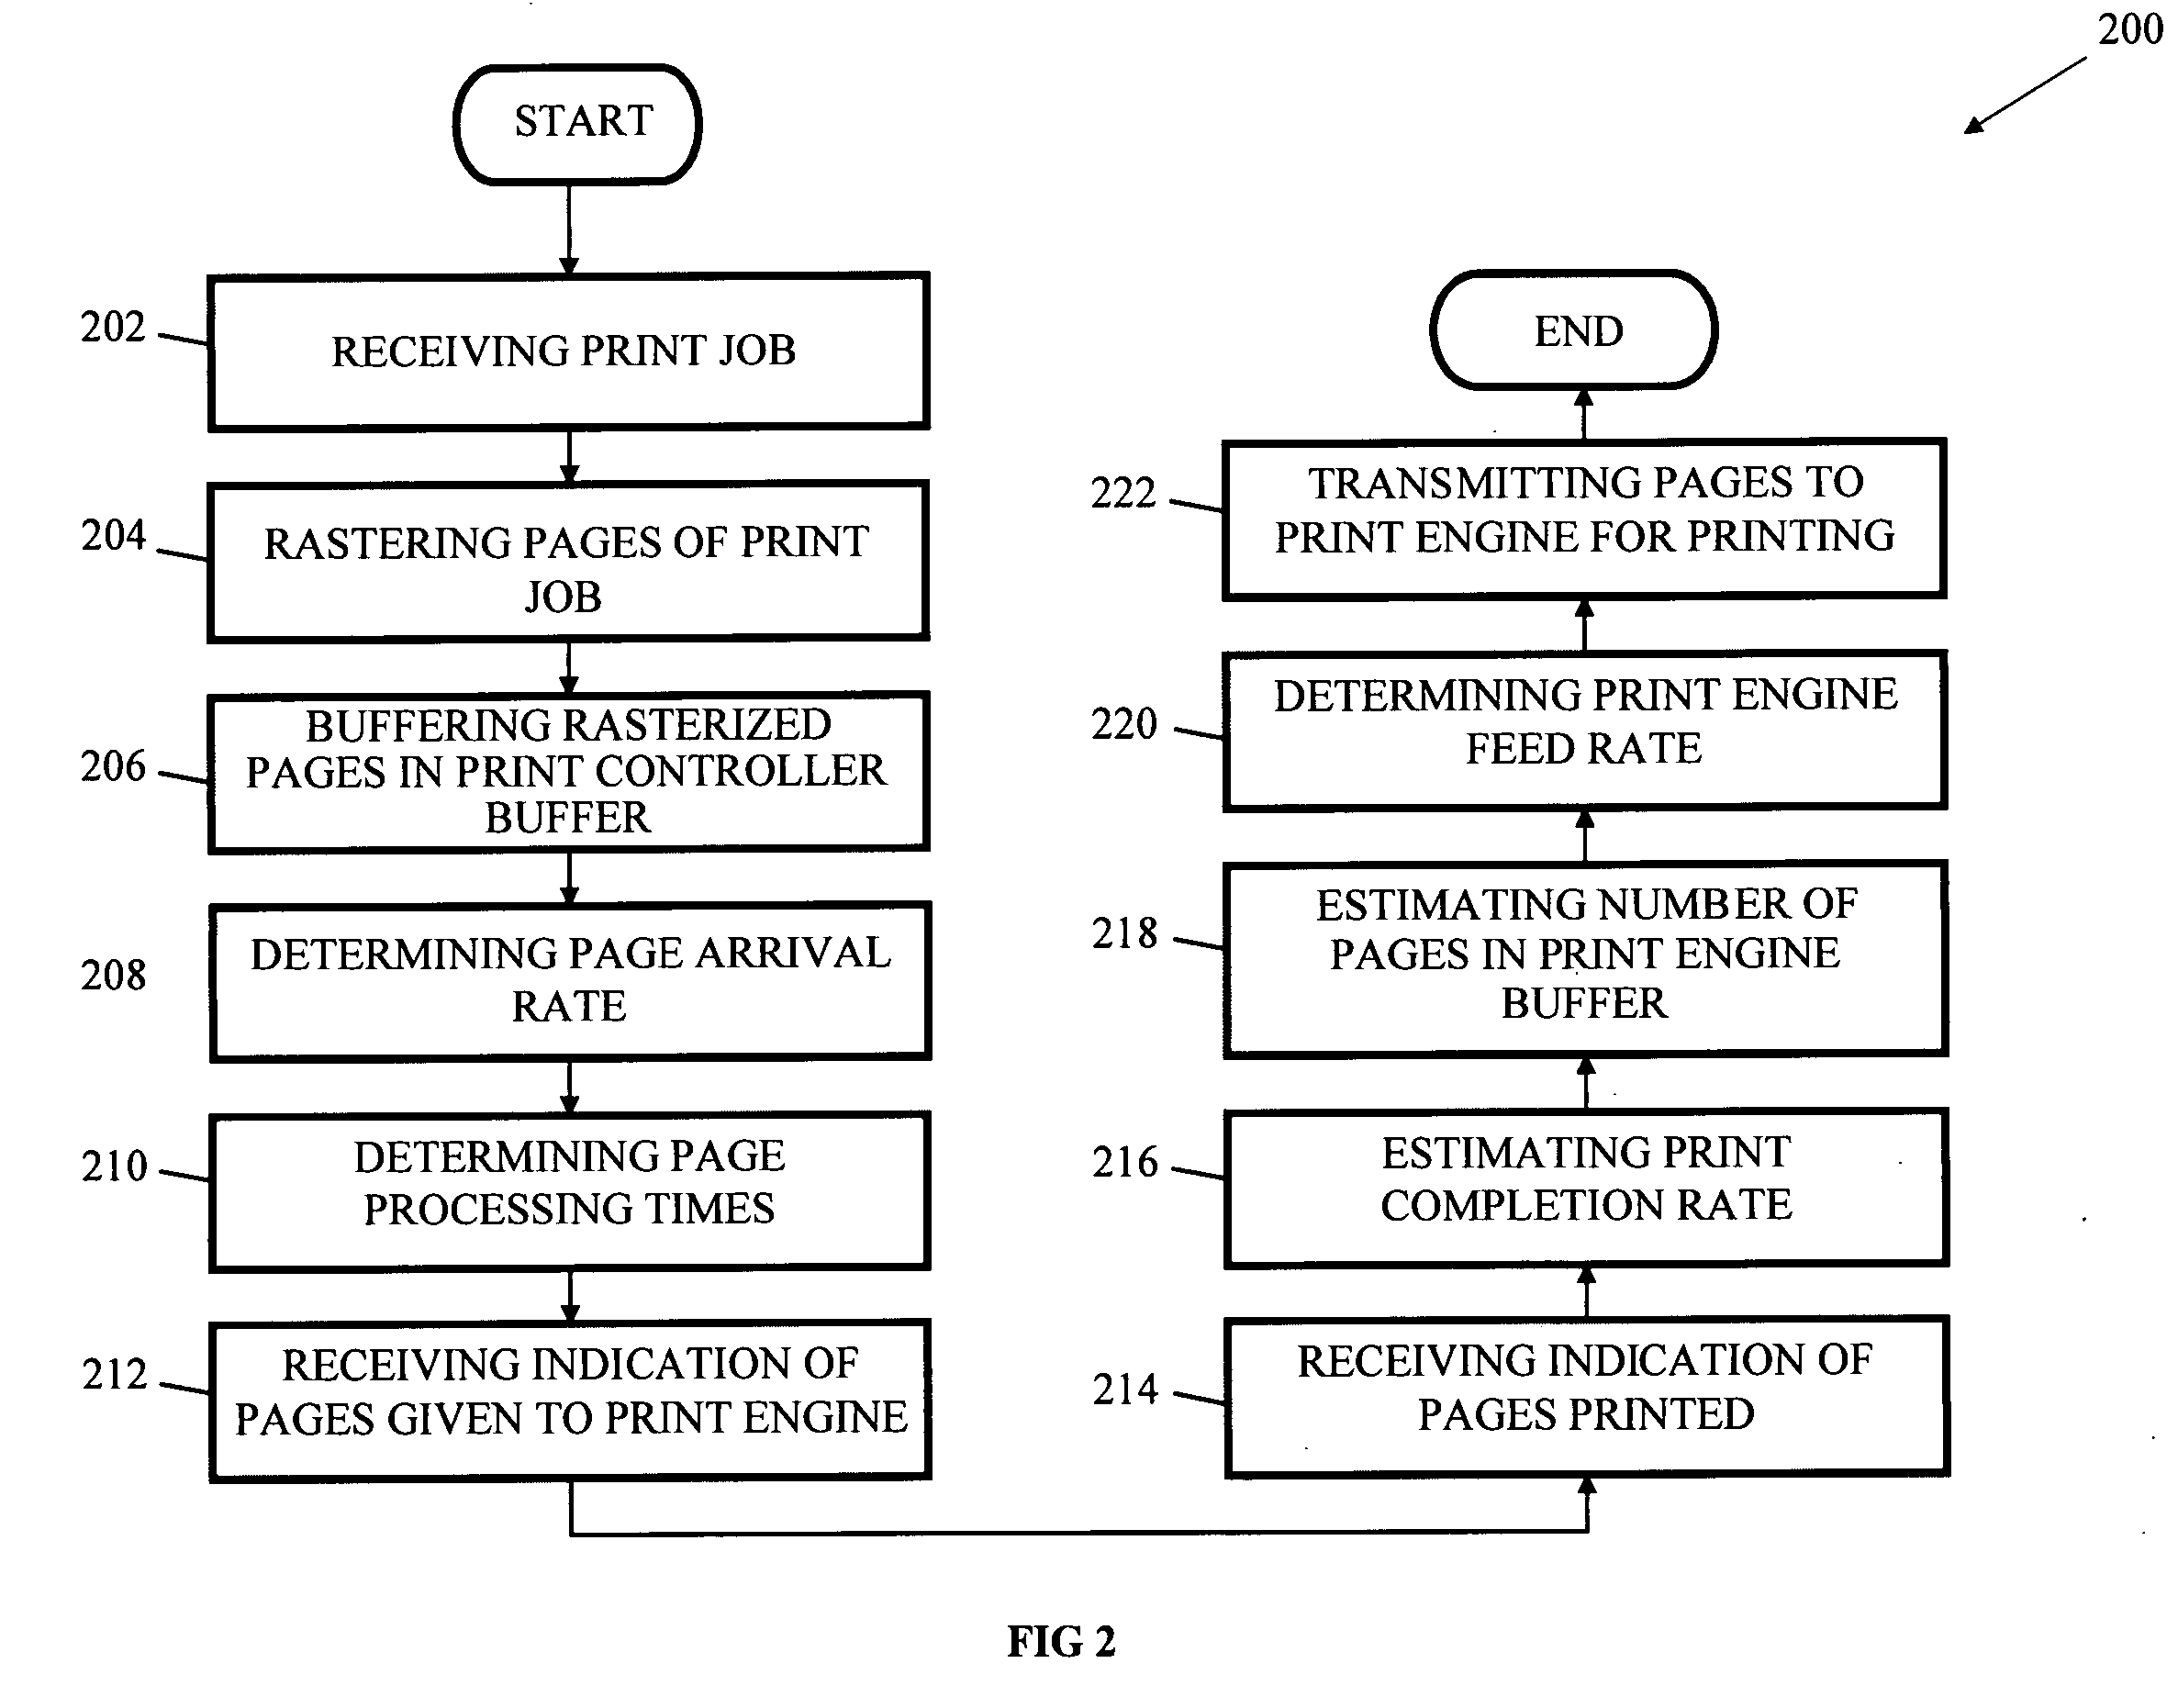 Systems, methods, media for managing the print speed of a variable speed printer